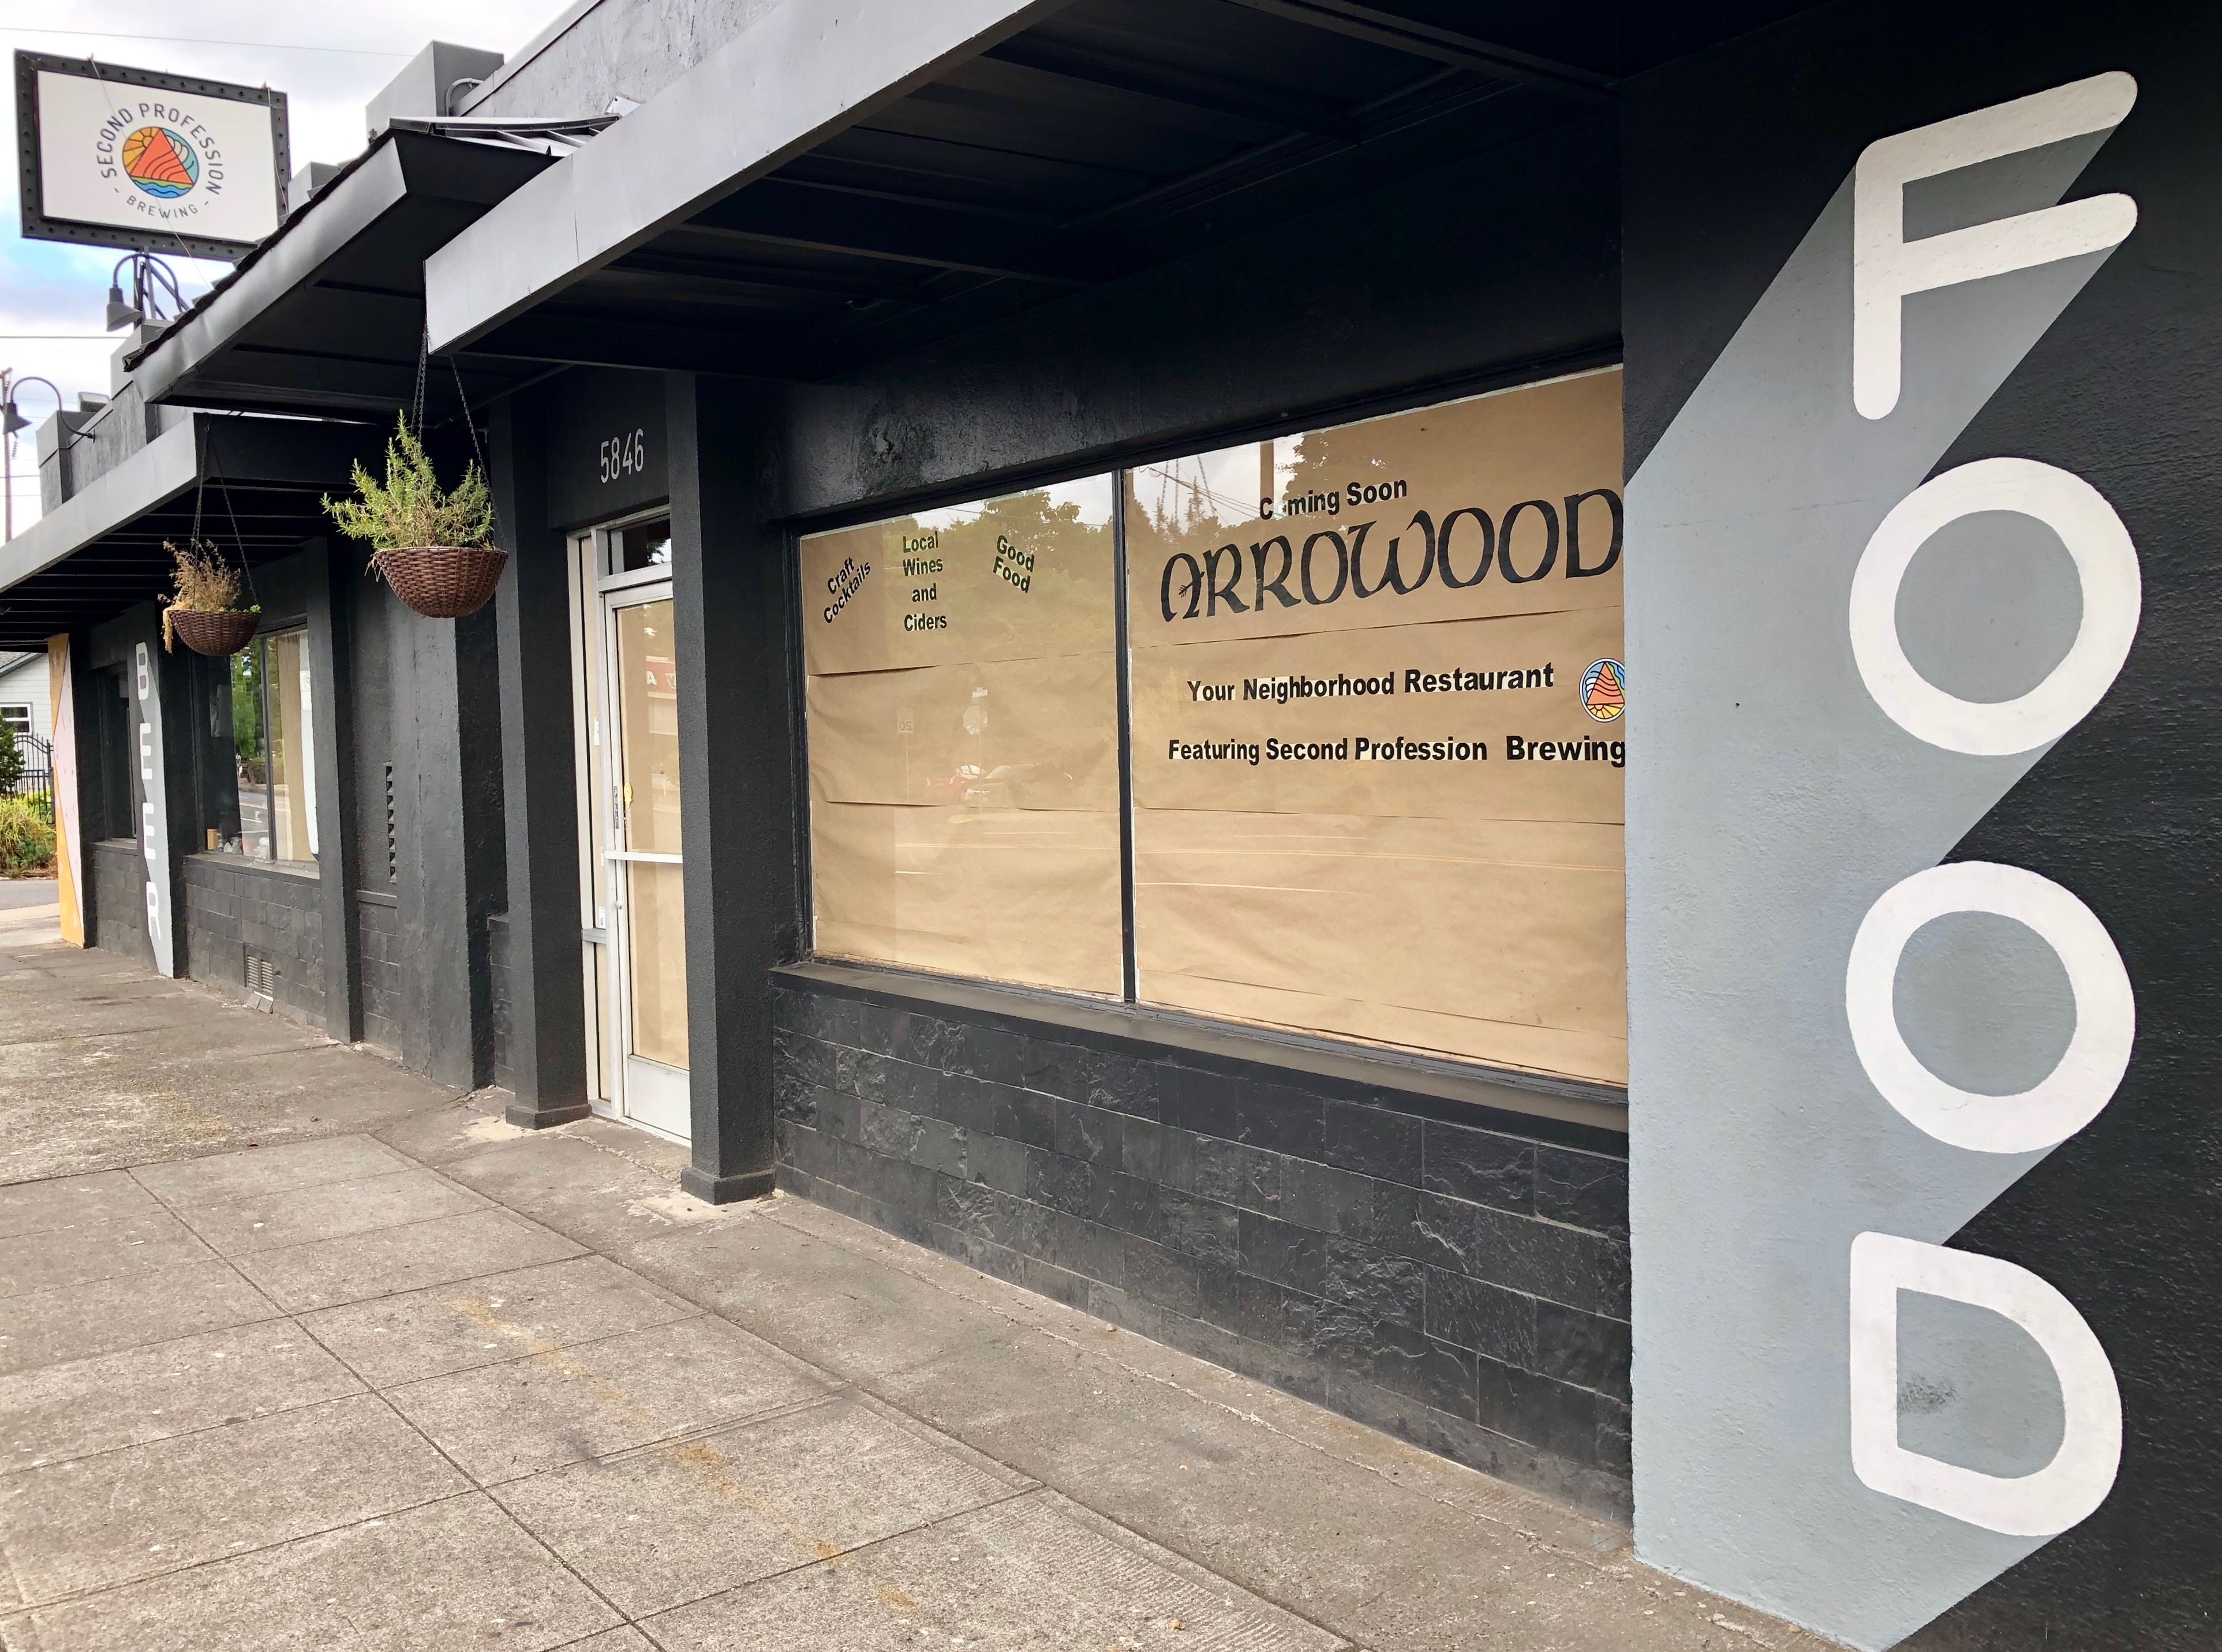 Second Profession Brewing closes its pub as Arrowood will take over the restaurant operations and the brewery will solely focus on brewing. (photo by Cat Stelzer)